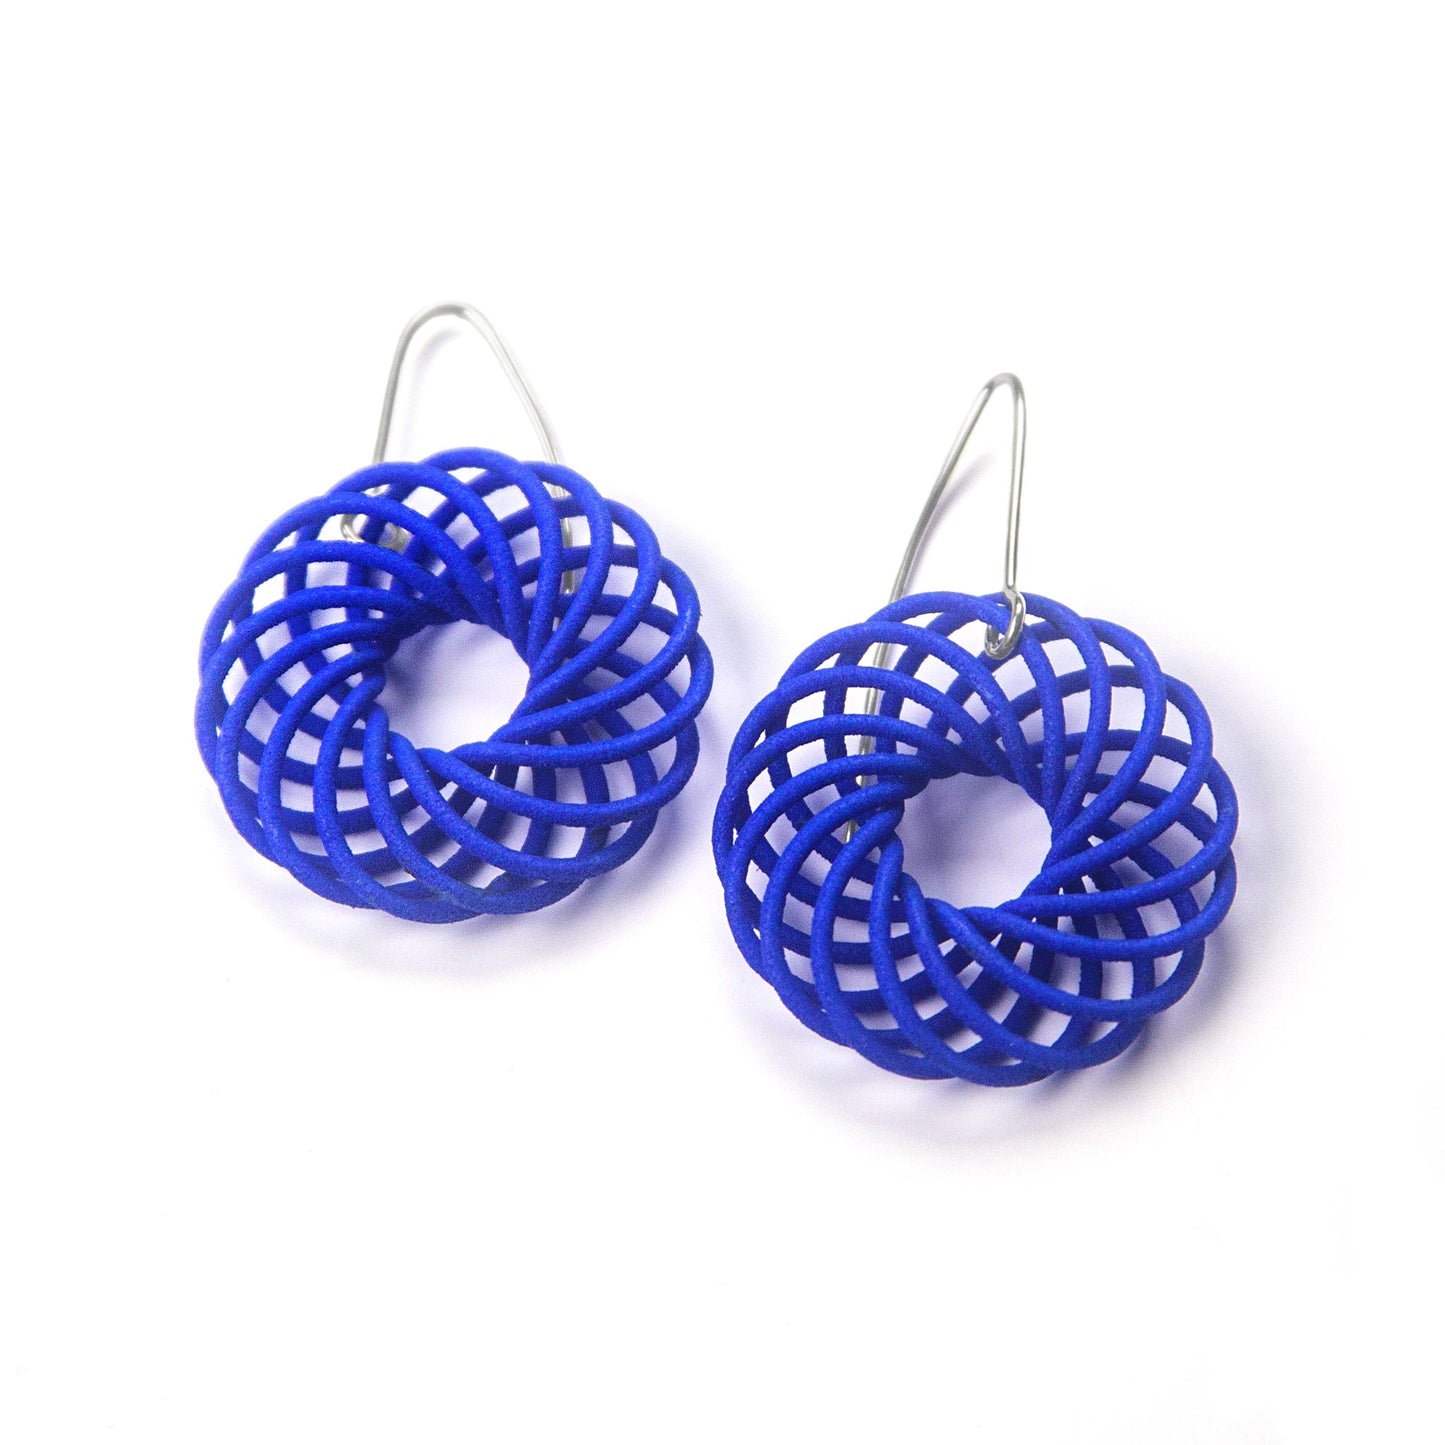 Small blue Vortex 3D printed nylon earrings by Katy Luxton